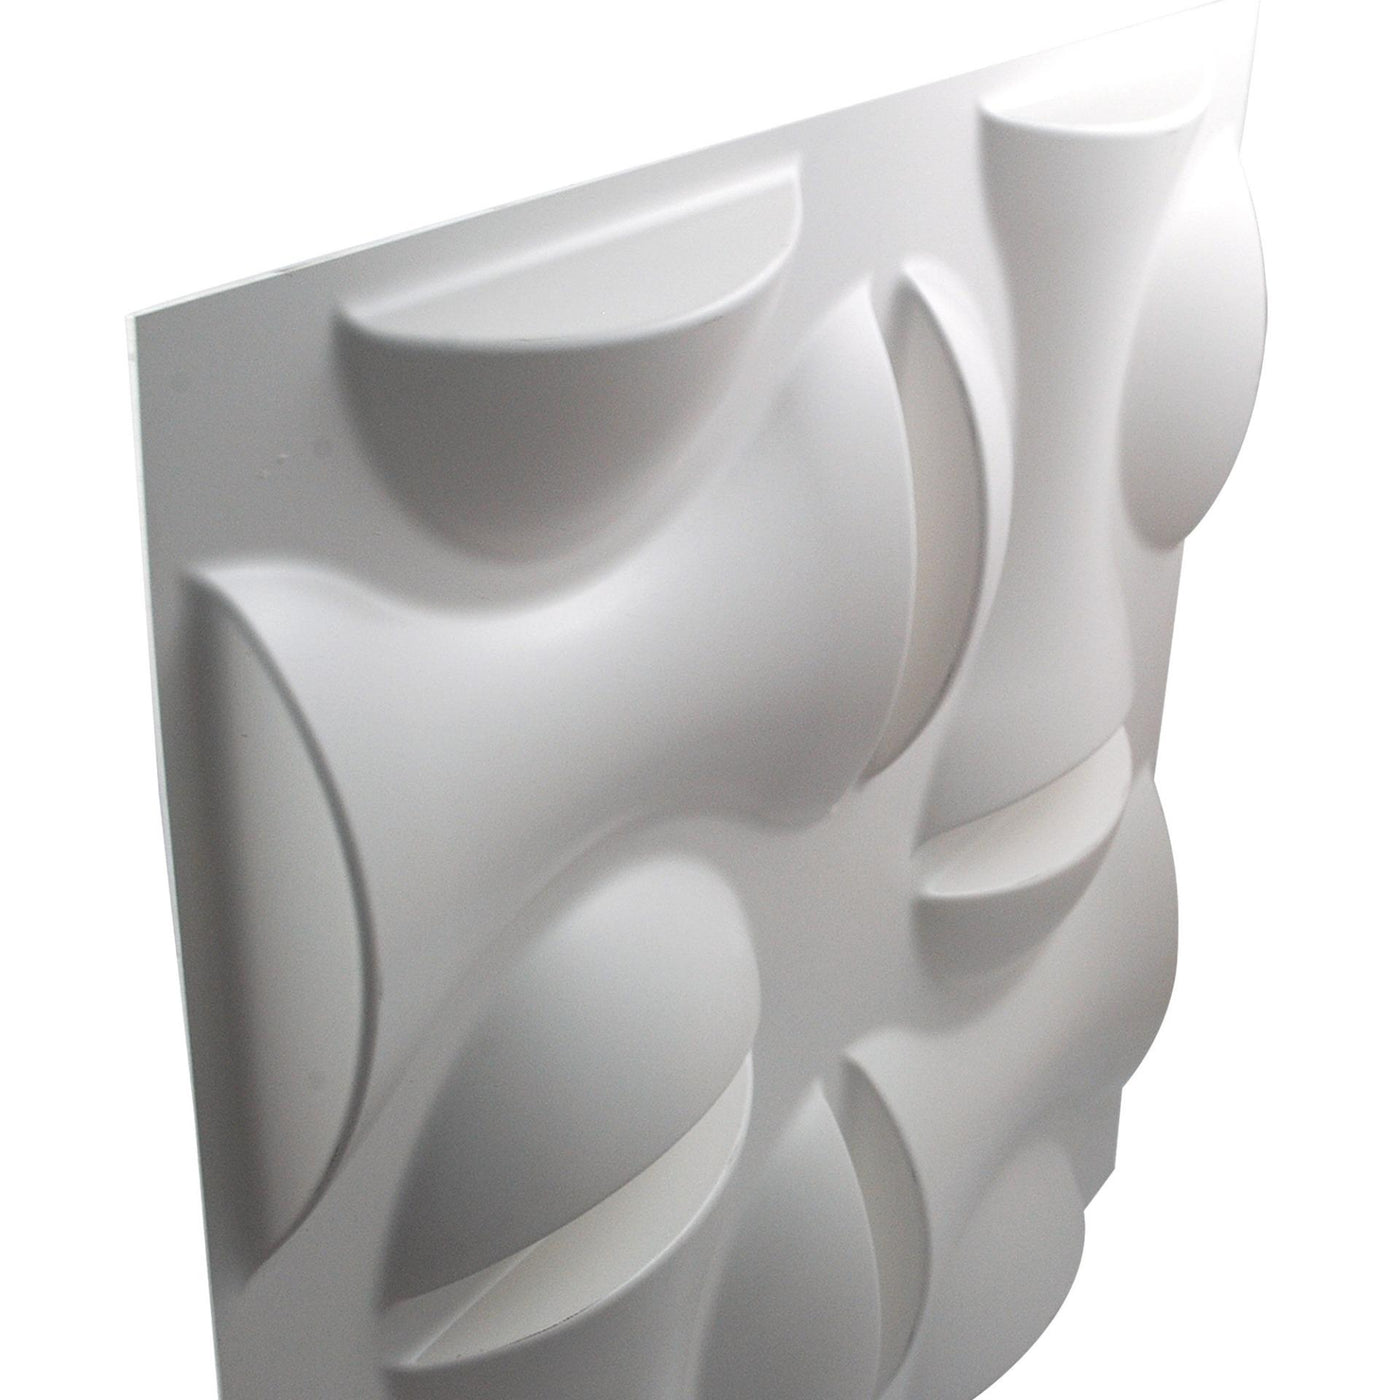 NEST DESIGN LAB 3D Wall-Art Infinity 4pcs 500 X 500 X 1.0MM Amazing Gift Idea For Any Occasion!